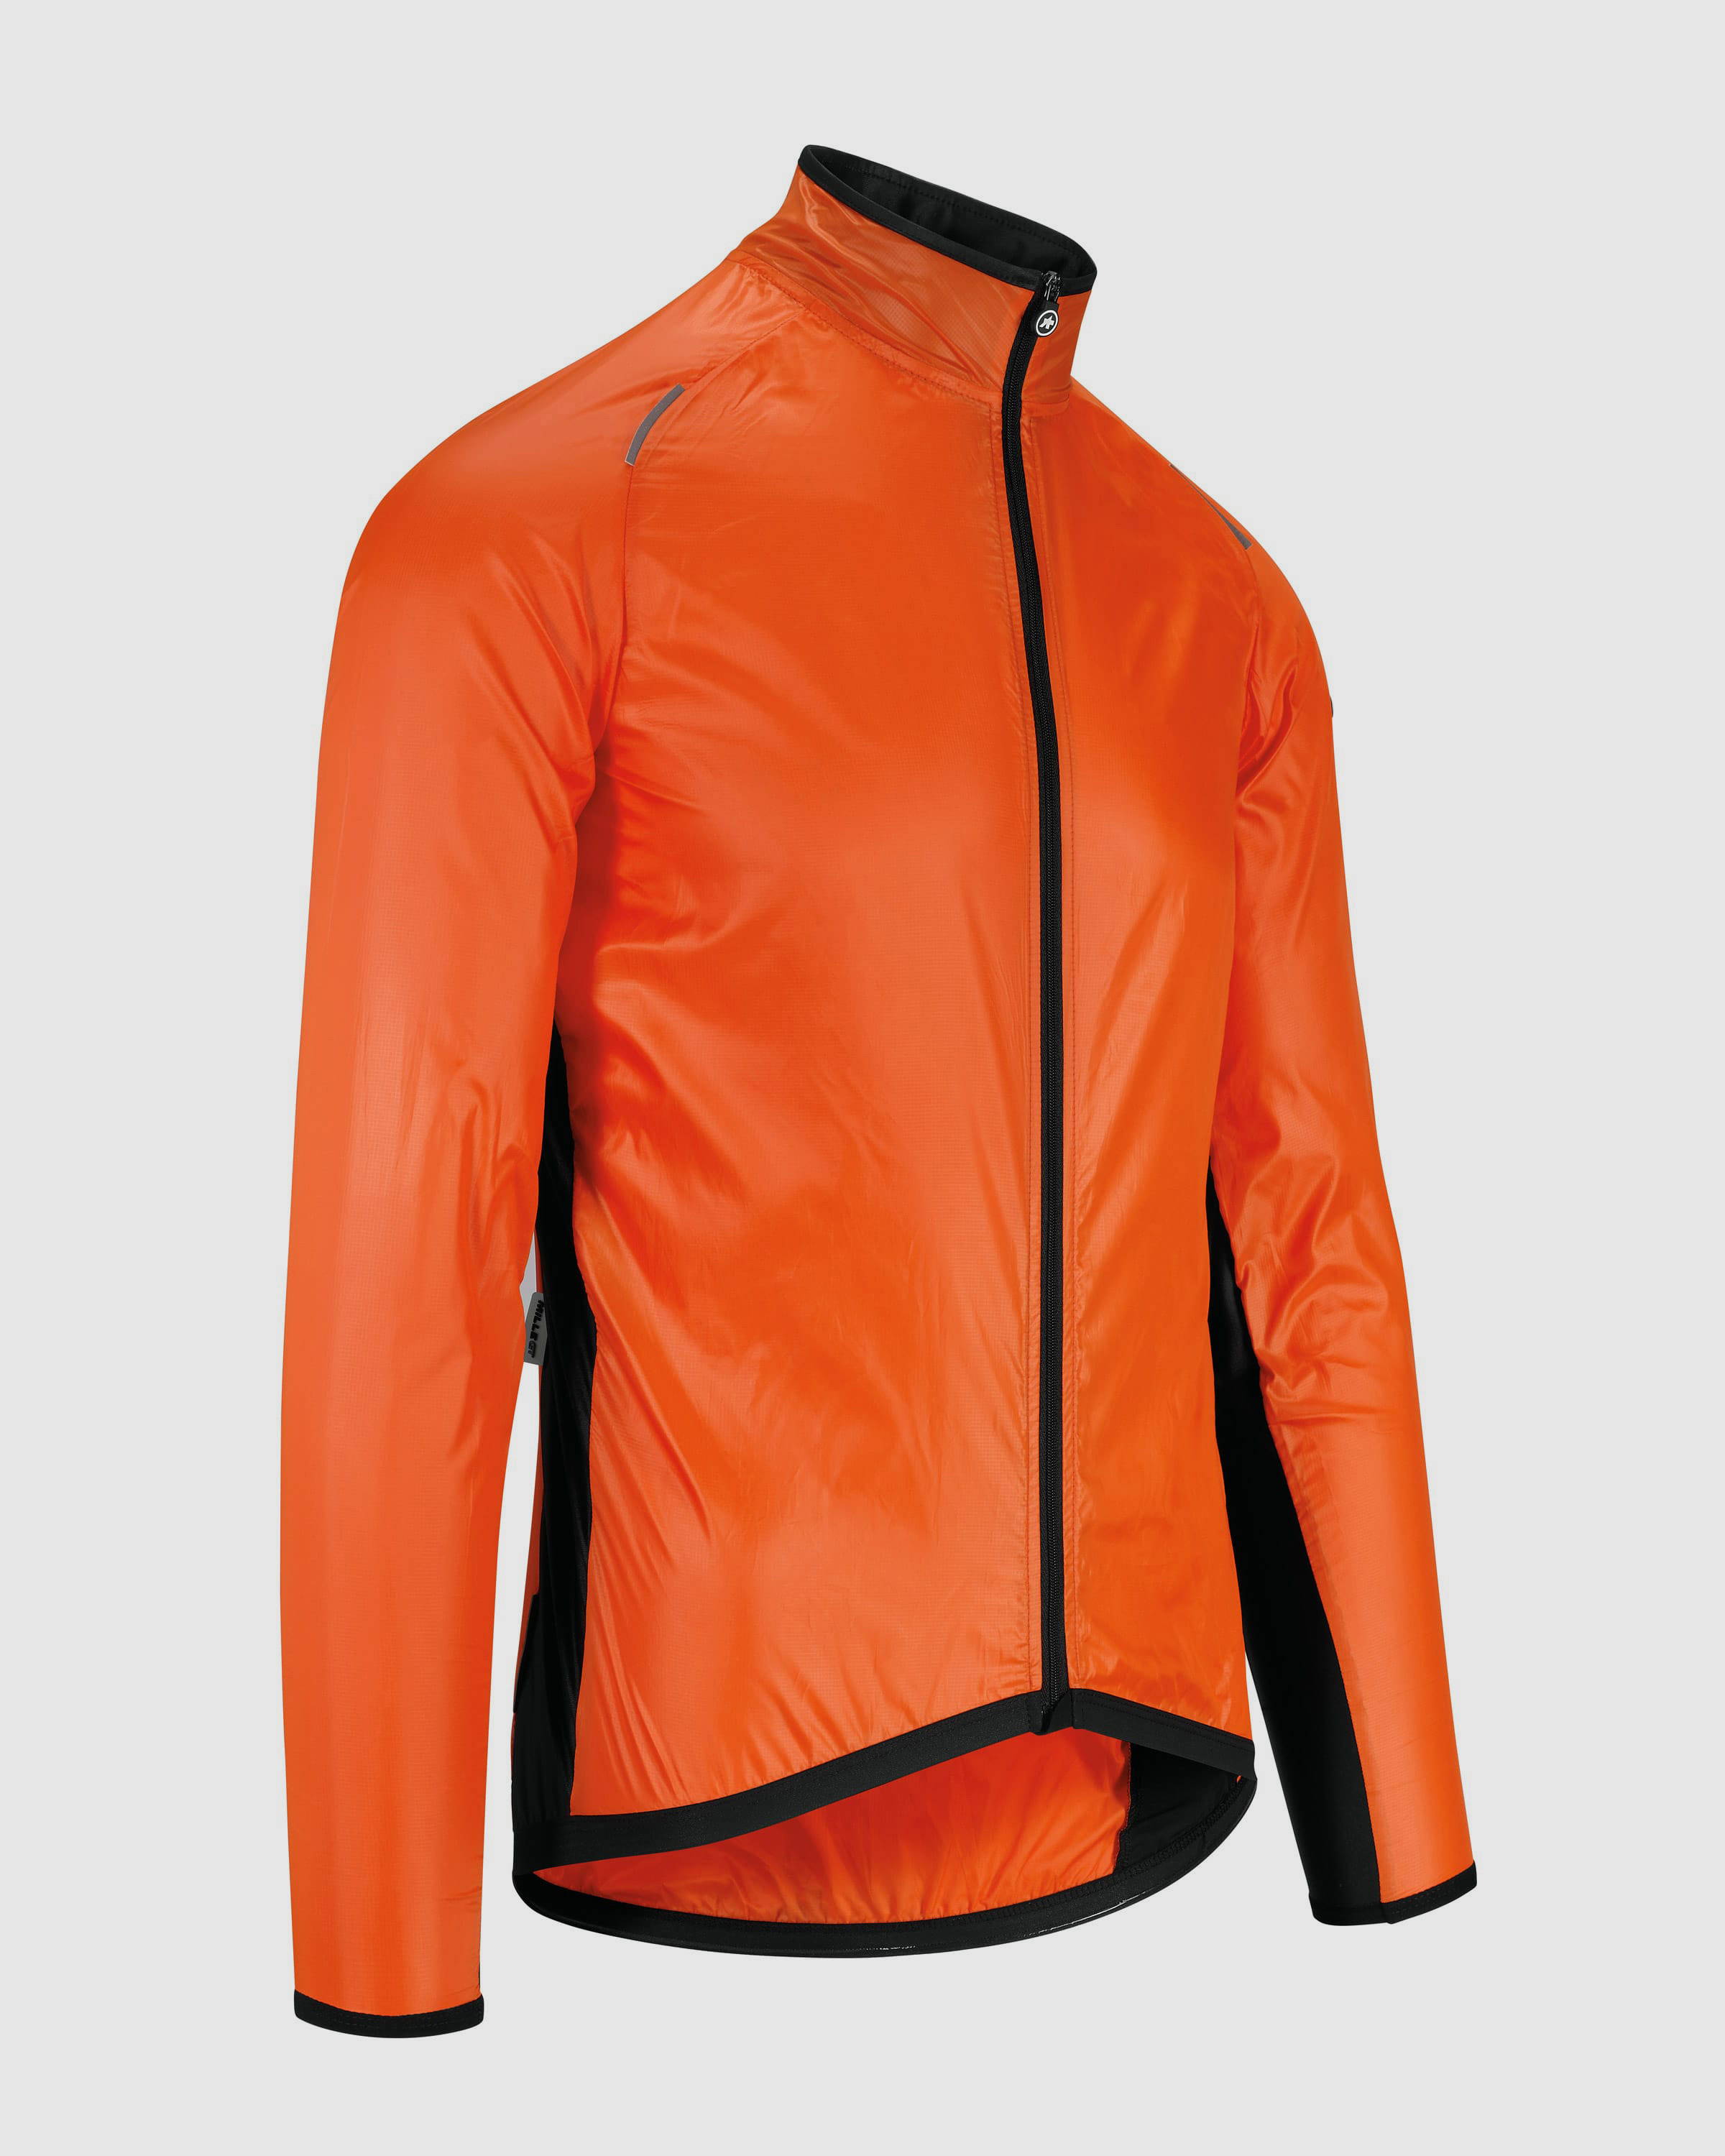 MILLE GT Wind Jacket - ASSOS Of Switzerland - Official Outlet